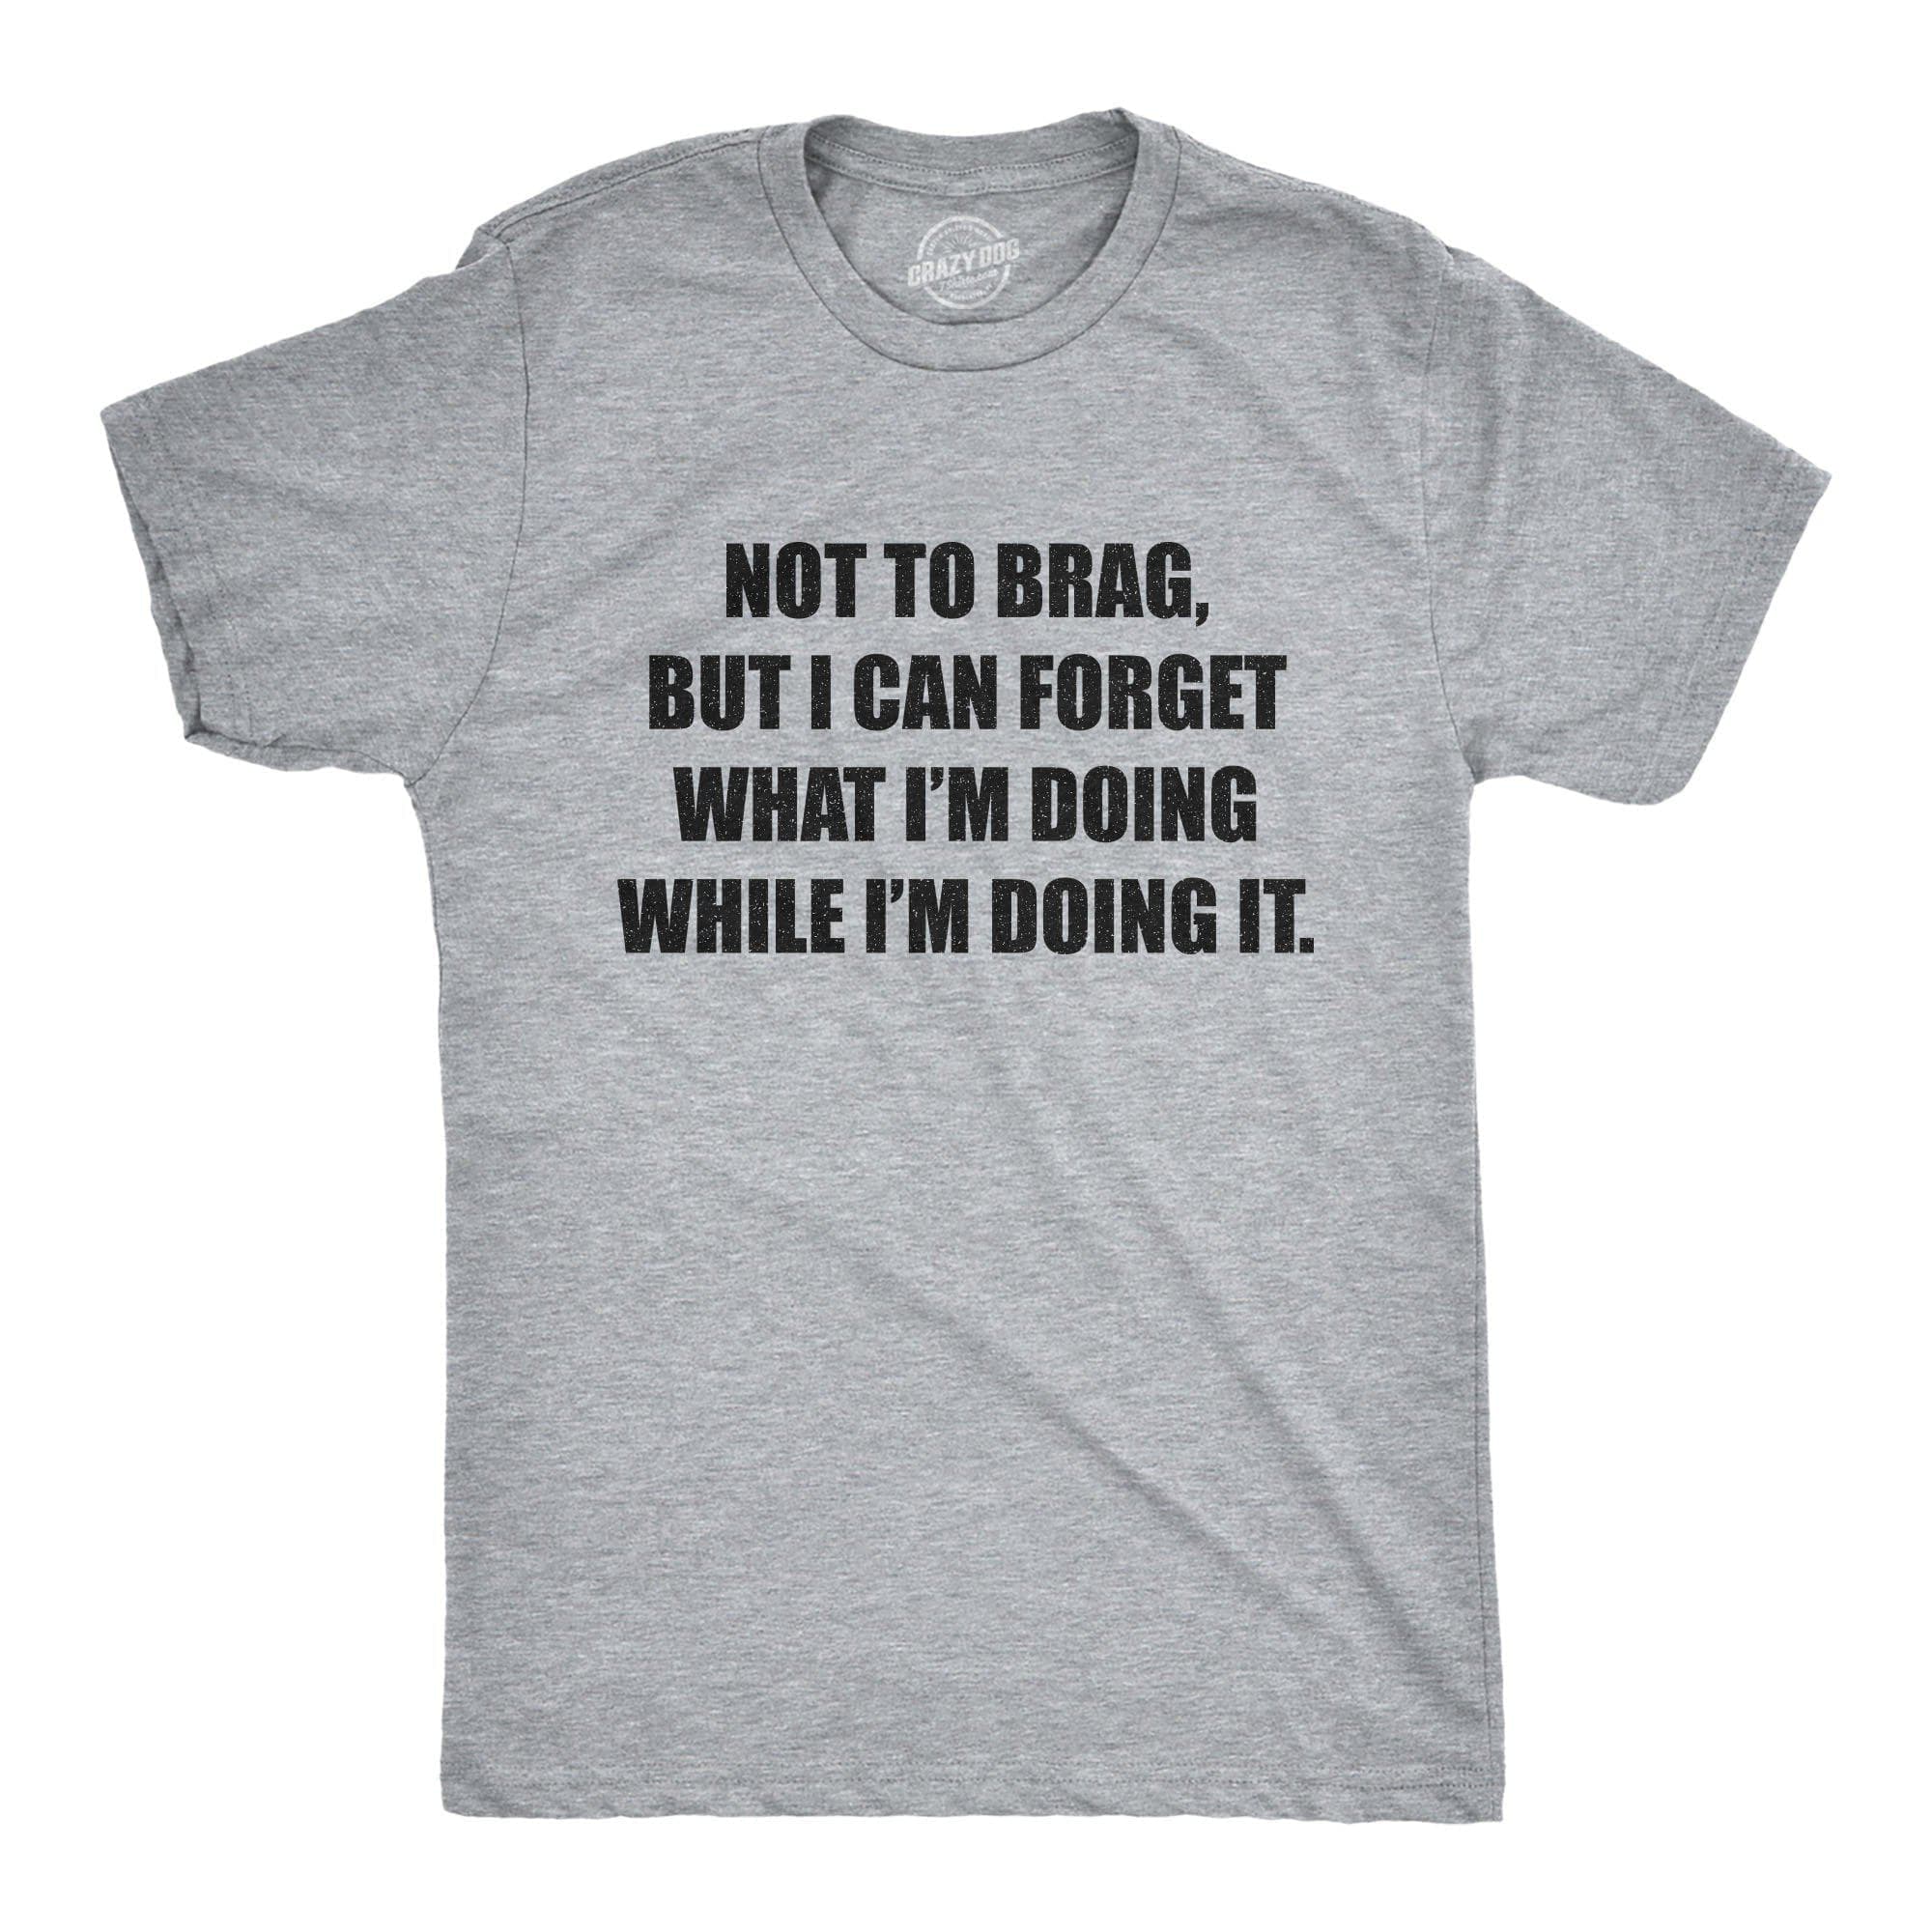 I Can Forget What I'm Doing While I'm Doing It Men's Tshirt - Crazy Dog T-Shirts